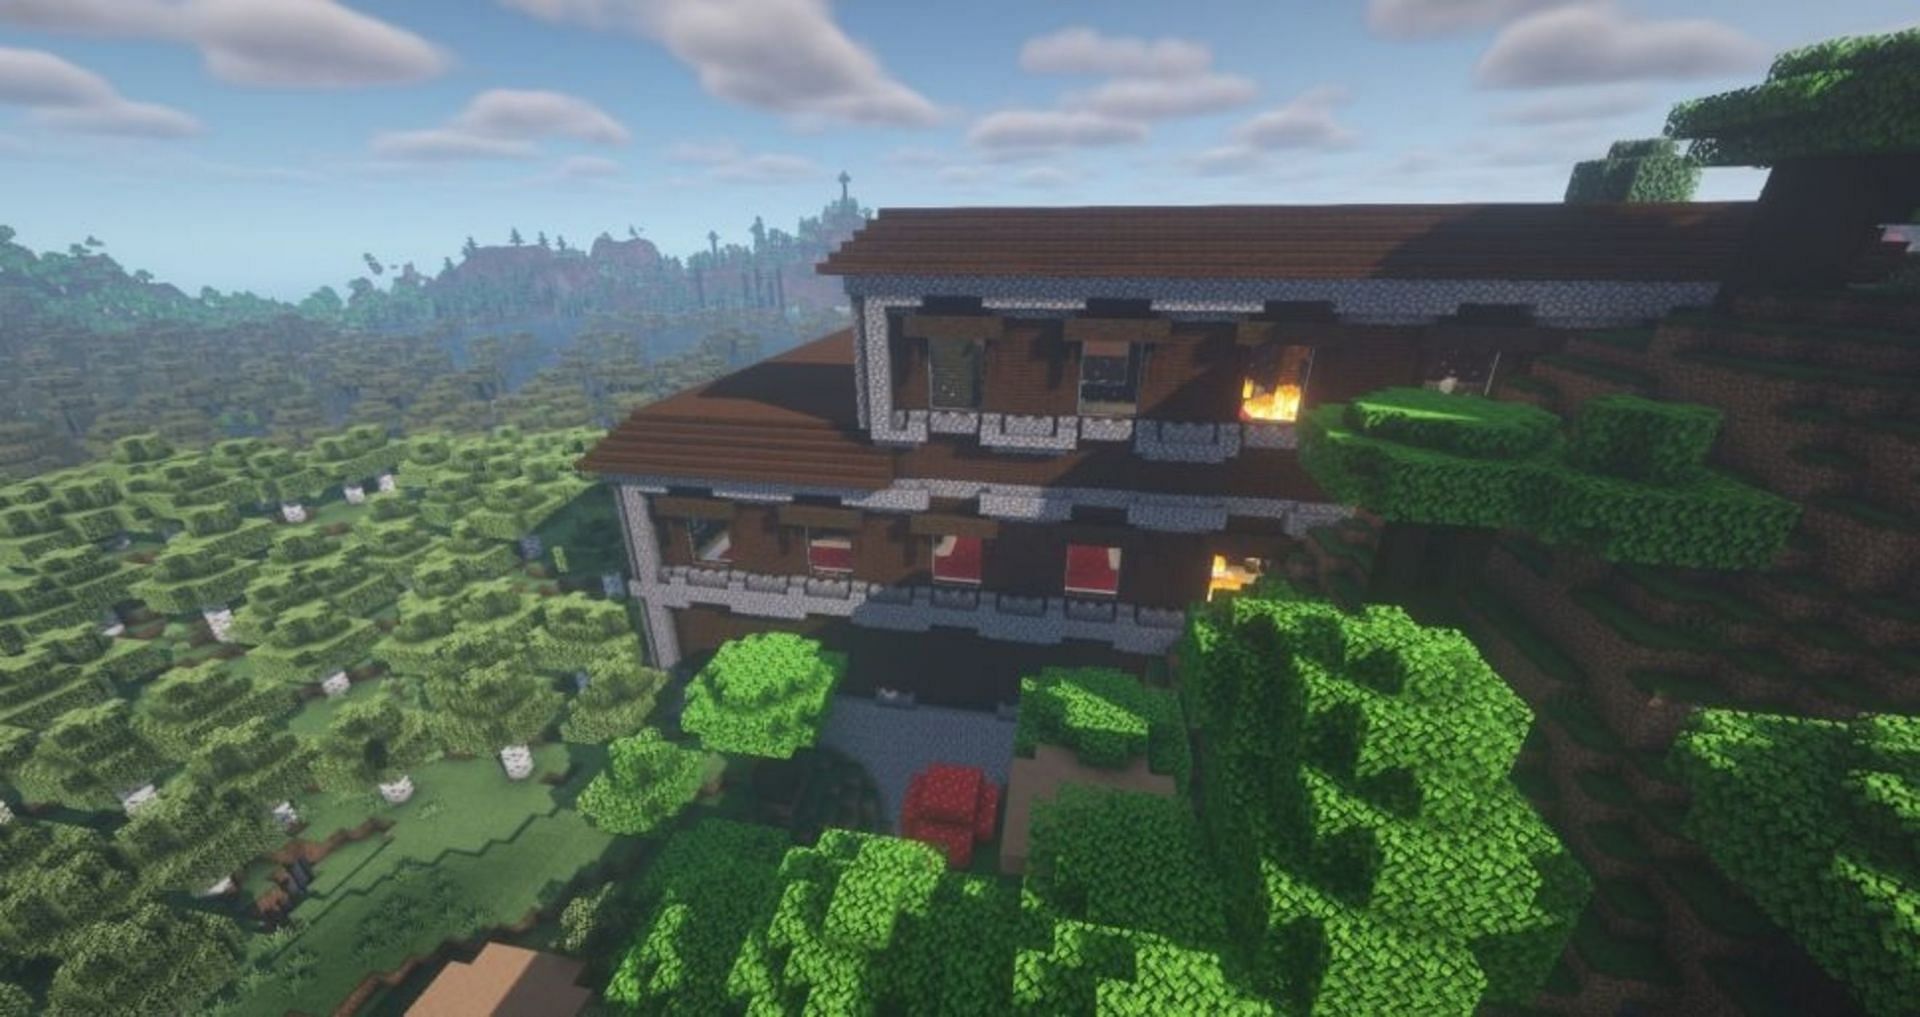 Players can get right into battle thanks to this seed&#039;s surroundings (Image via Mojang)